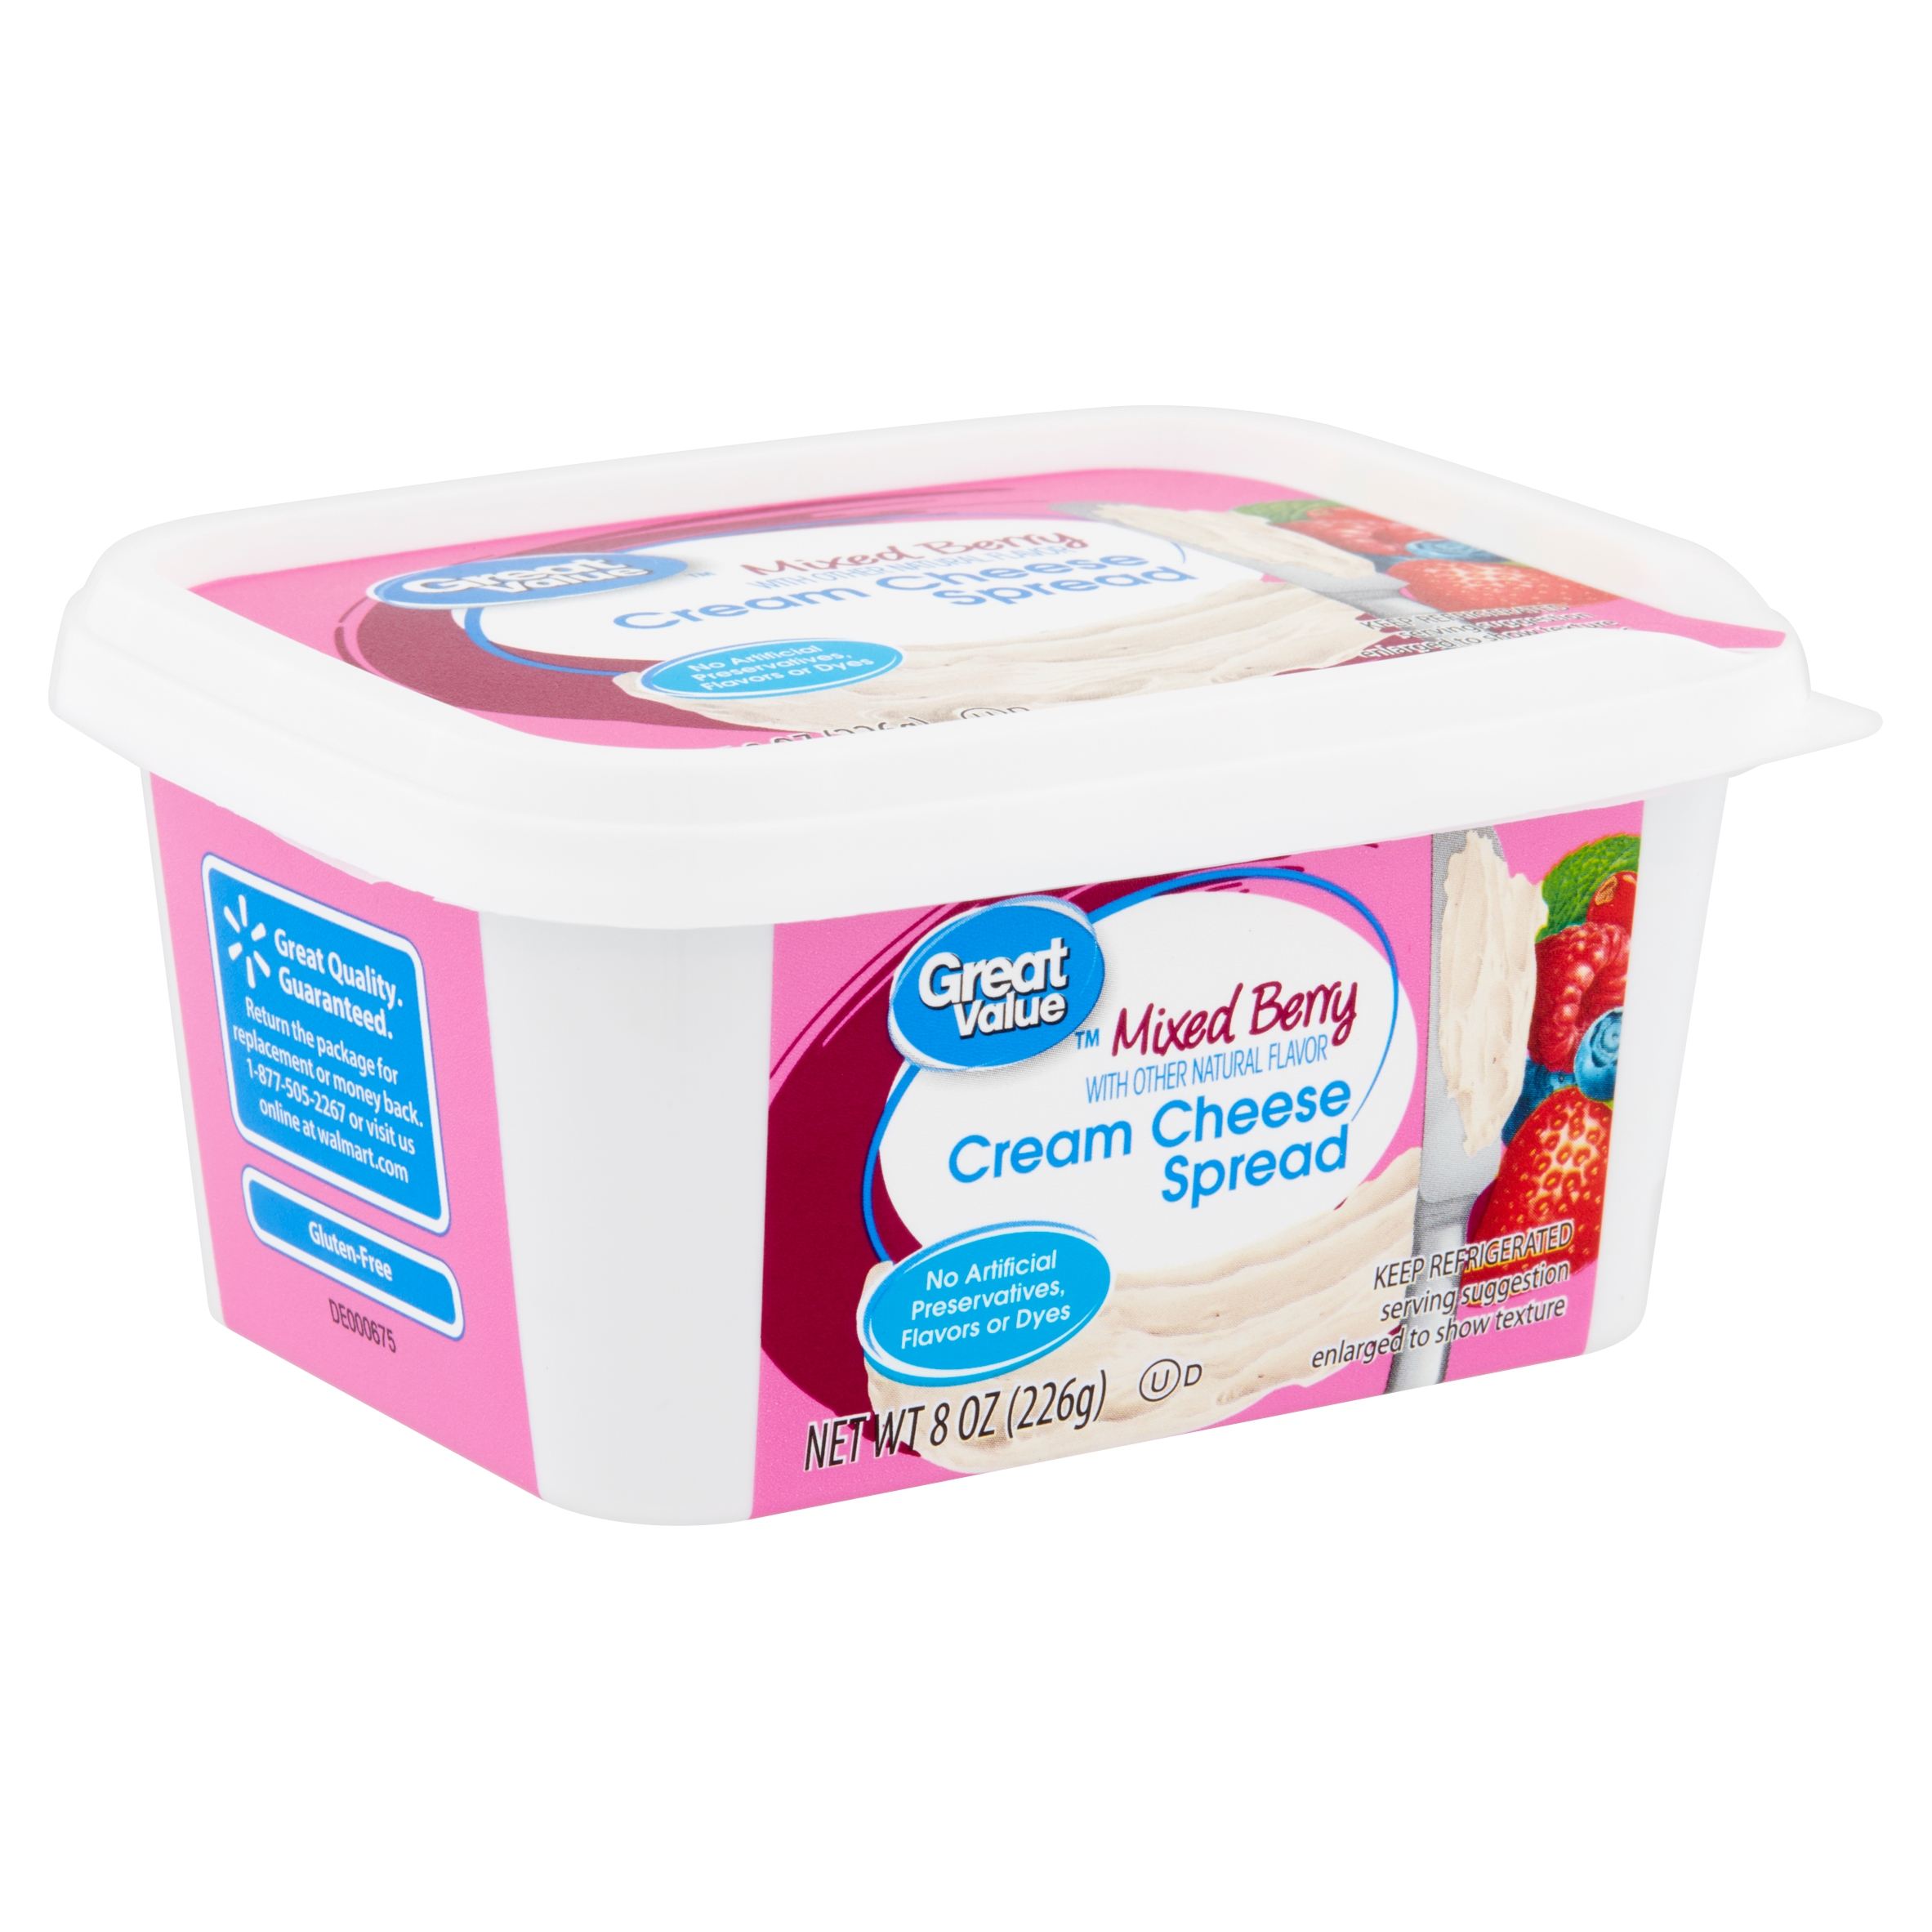 Great Value Mixed Berry Cream Cheese Spread, 8 Oz Image